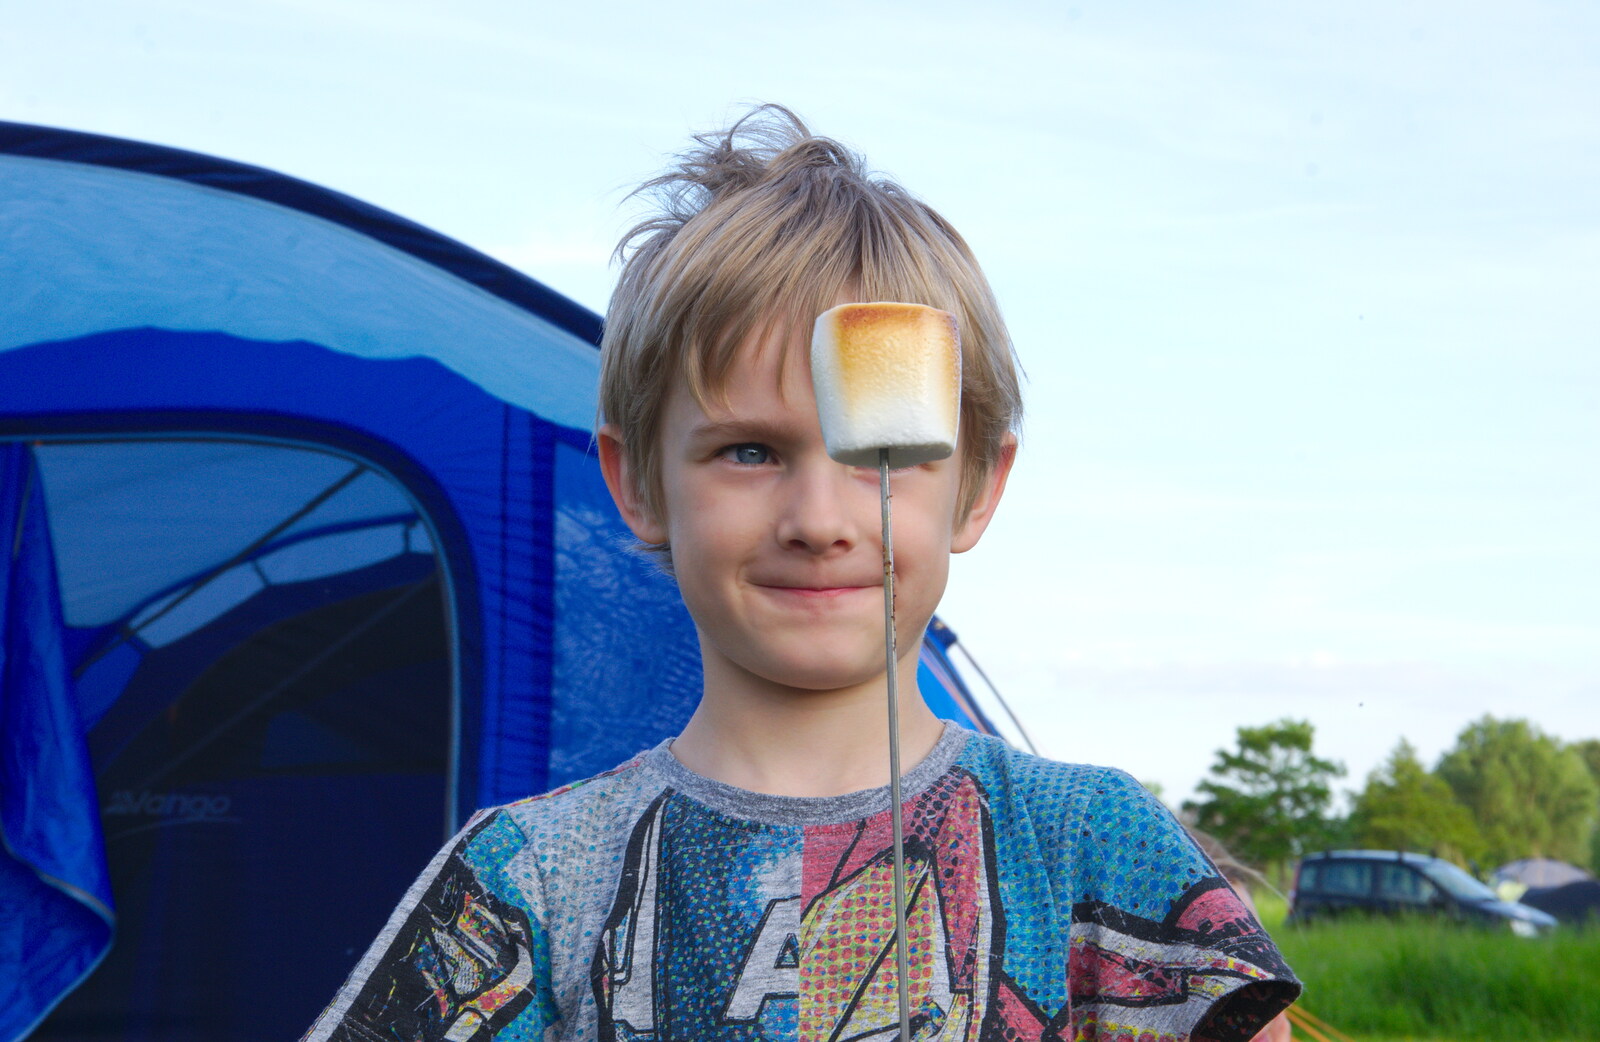 Harry's happy with his humongous marshmallow from Camping at Three Rivers, Geldeston, Norfolk - 1st June 2019